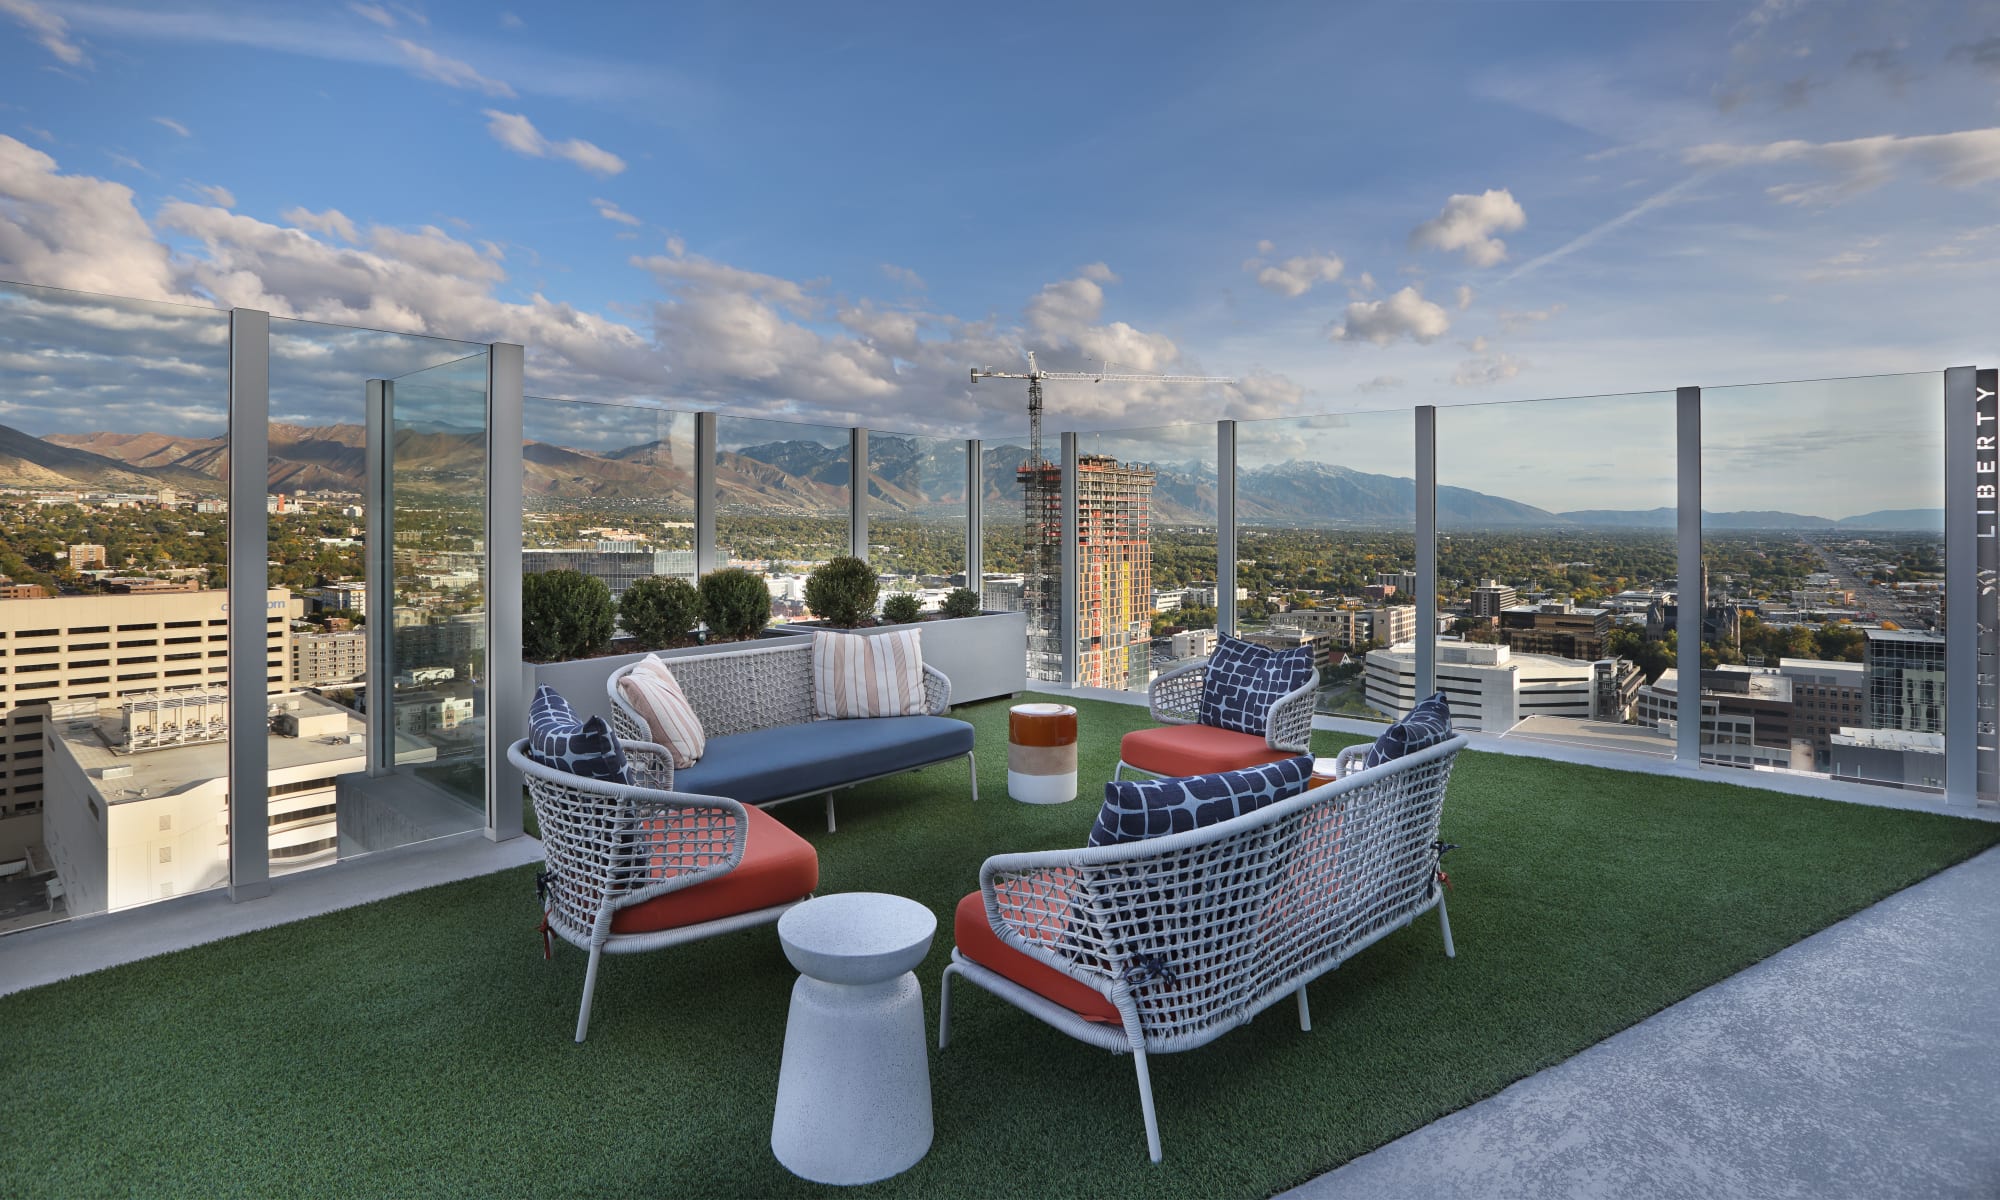 Rooftop patio with white furniture and red and blue cushions and mountain view at Luxury high-rise community of Liberty SKY in Salt Lake City, Utah